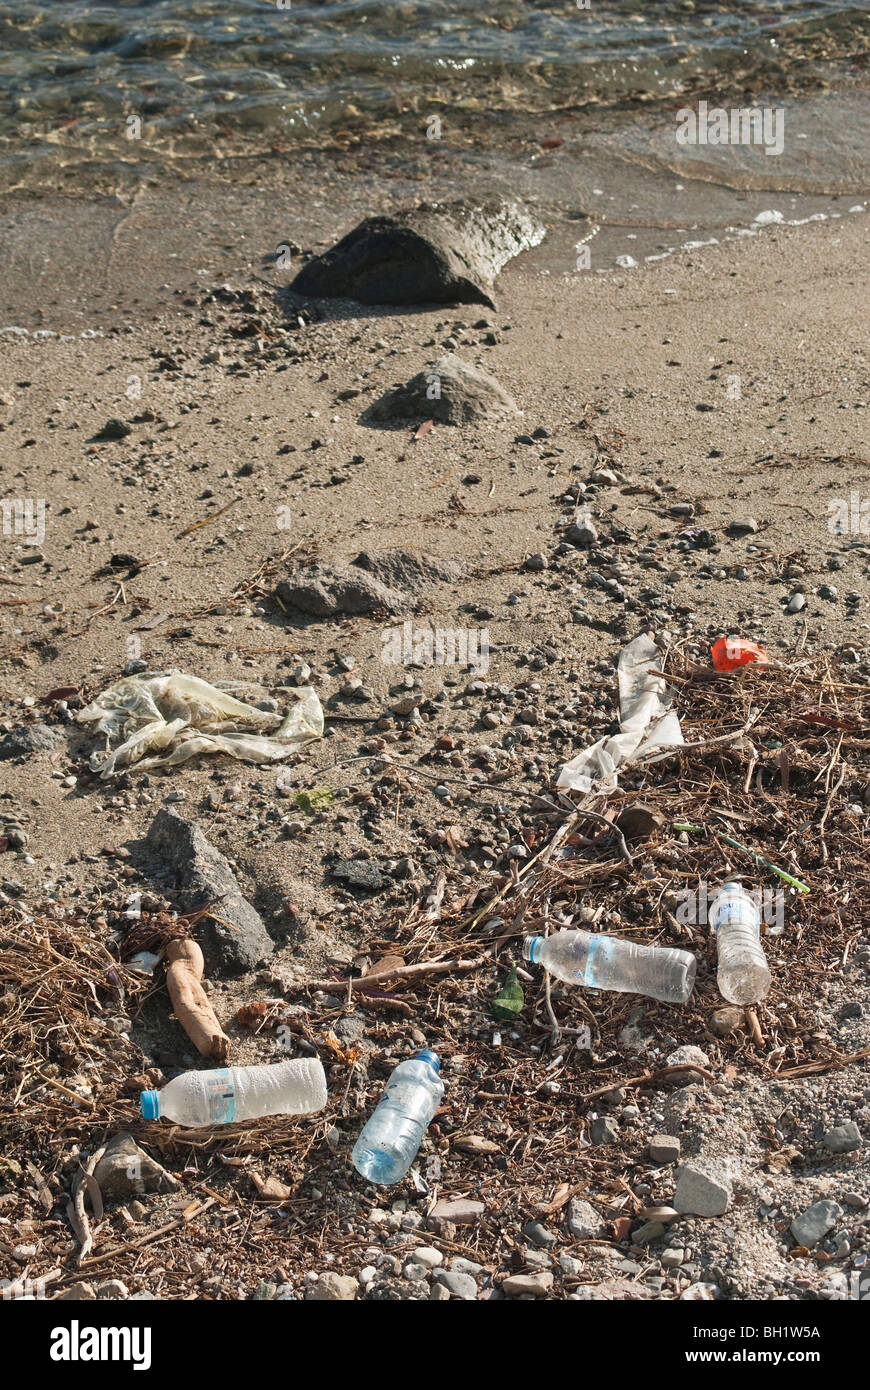 Rubbish washed up on the high tide line of on a beach in Greece Stock Photo